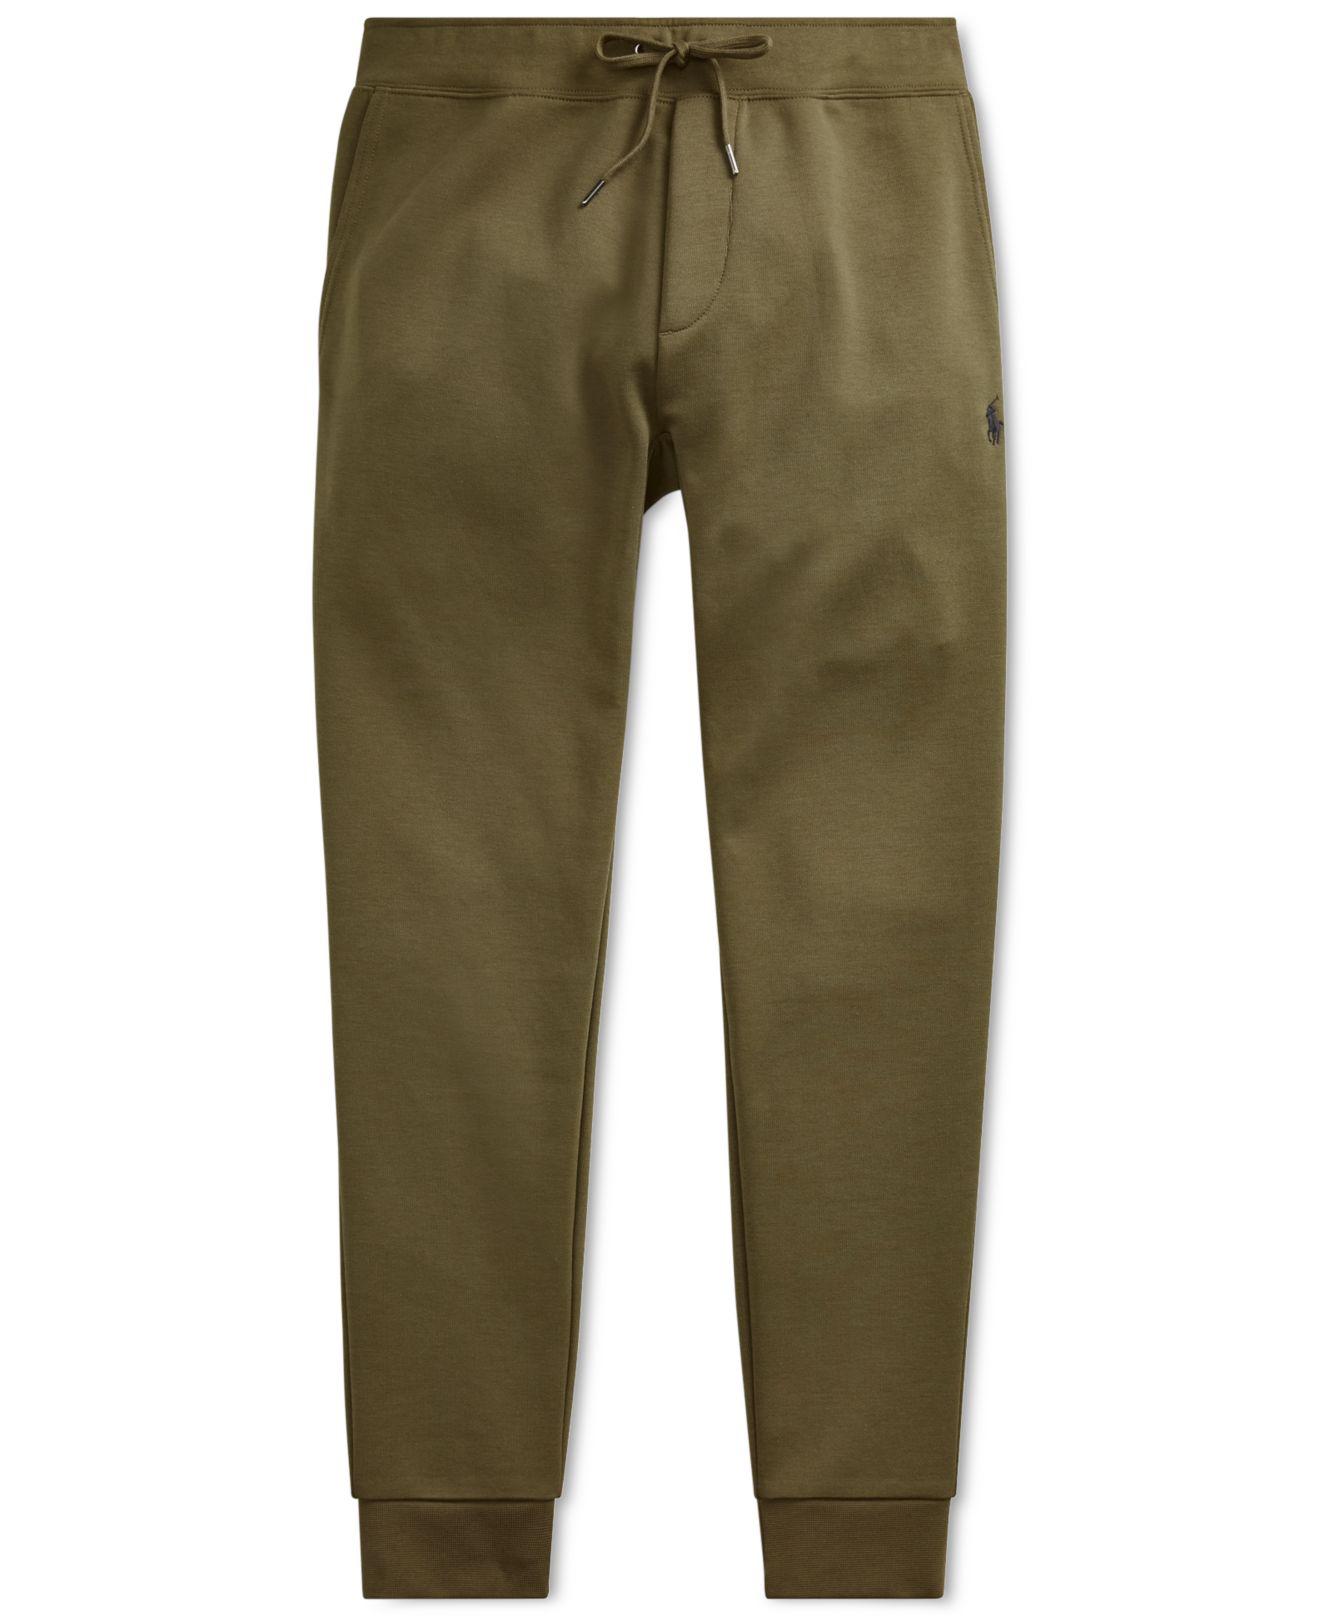 Polo Ralph Lauren Double-knit Jogger Pants in Olive (Green) for 